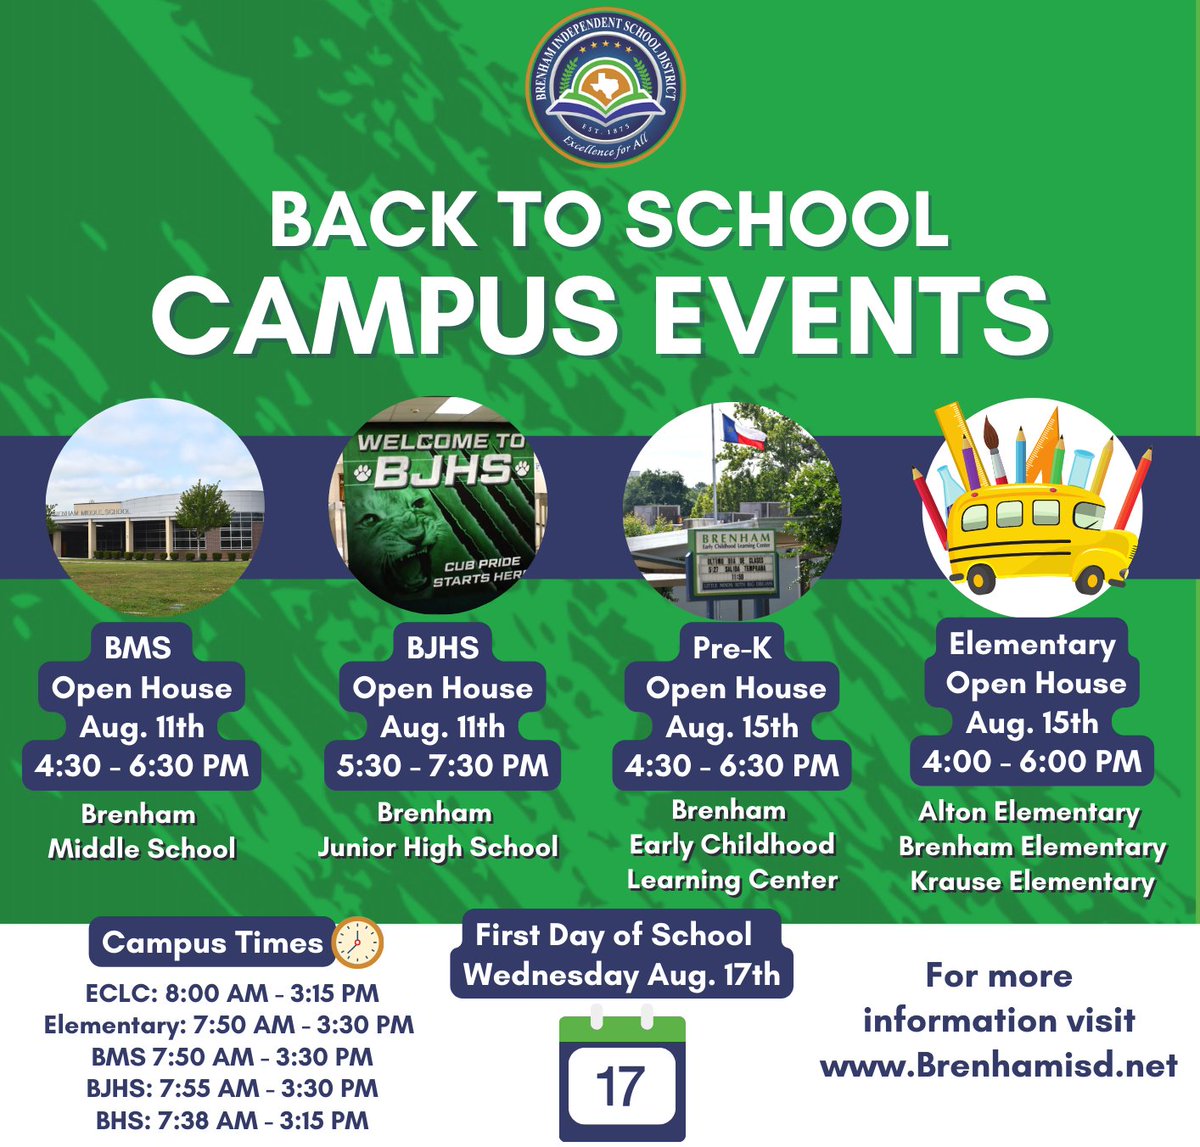 See the attached flyer to view back to school campus events coming up! We look forward to seeing you!